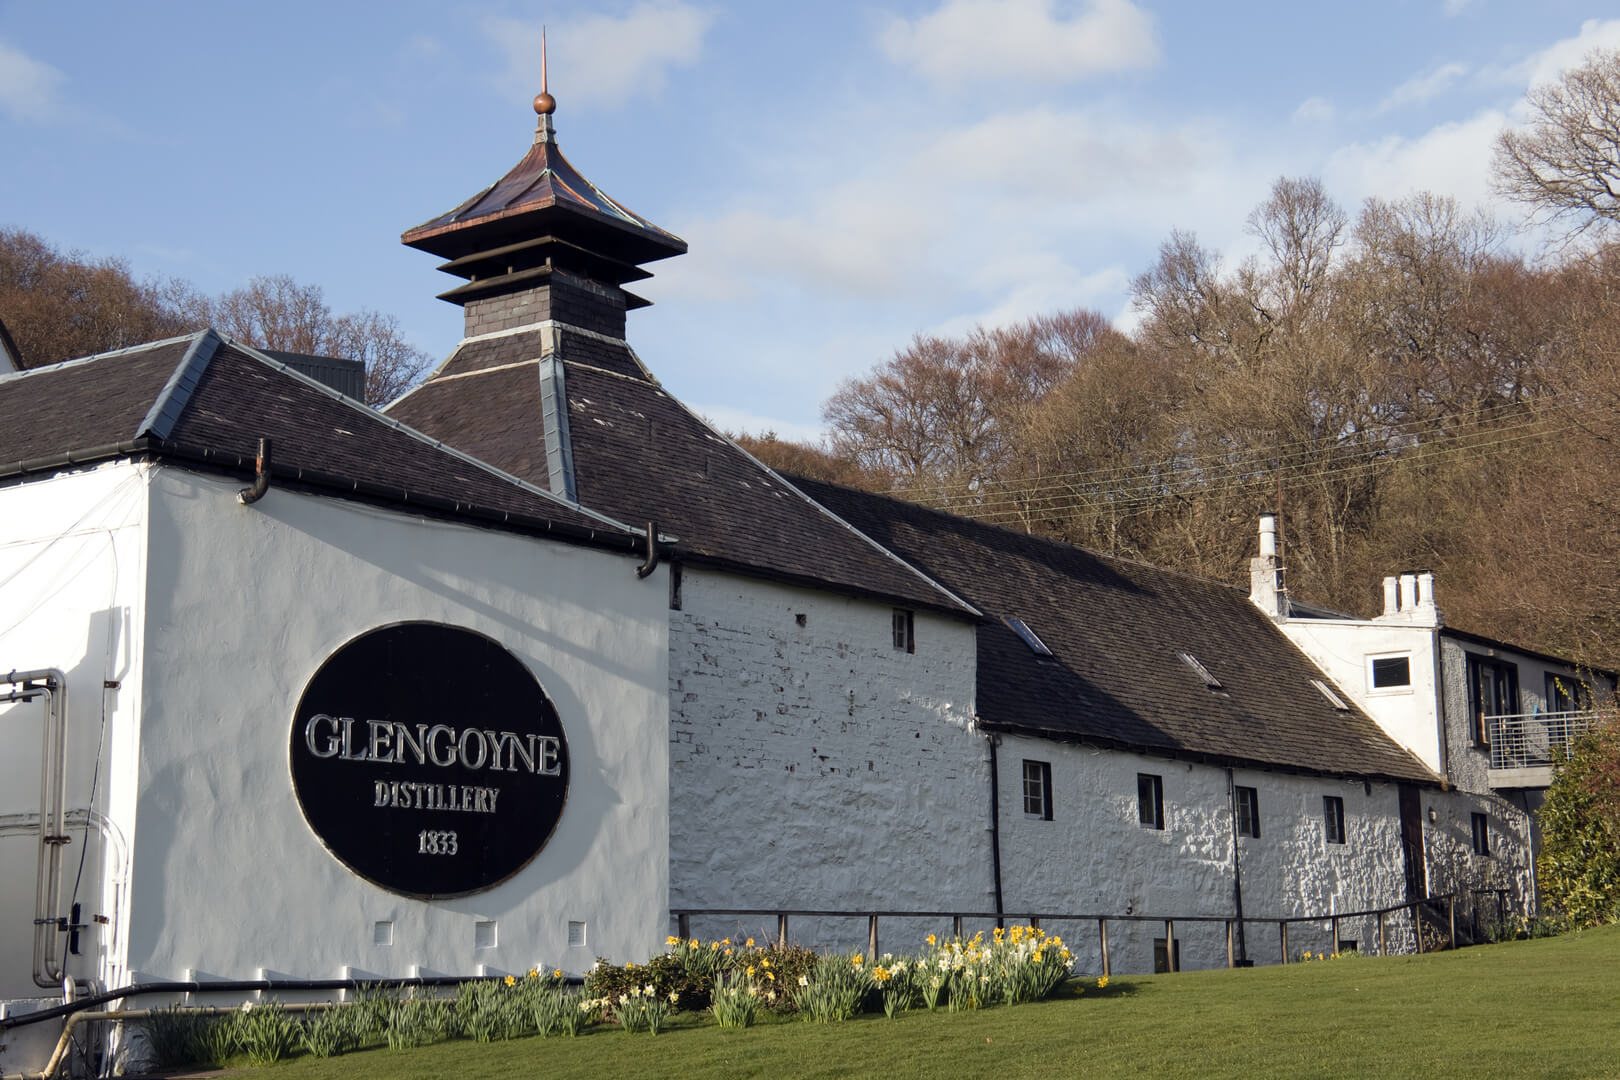 The Glengoyne Distillery at Dumgoyne just north of Glasgow, Scotland. The distillery was built in 1833.